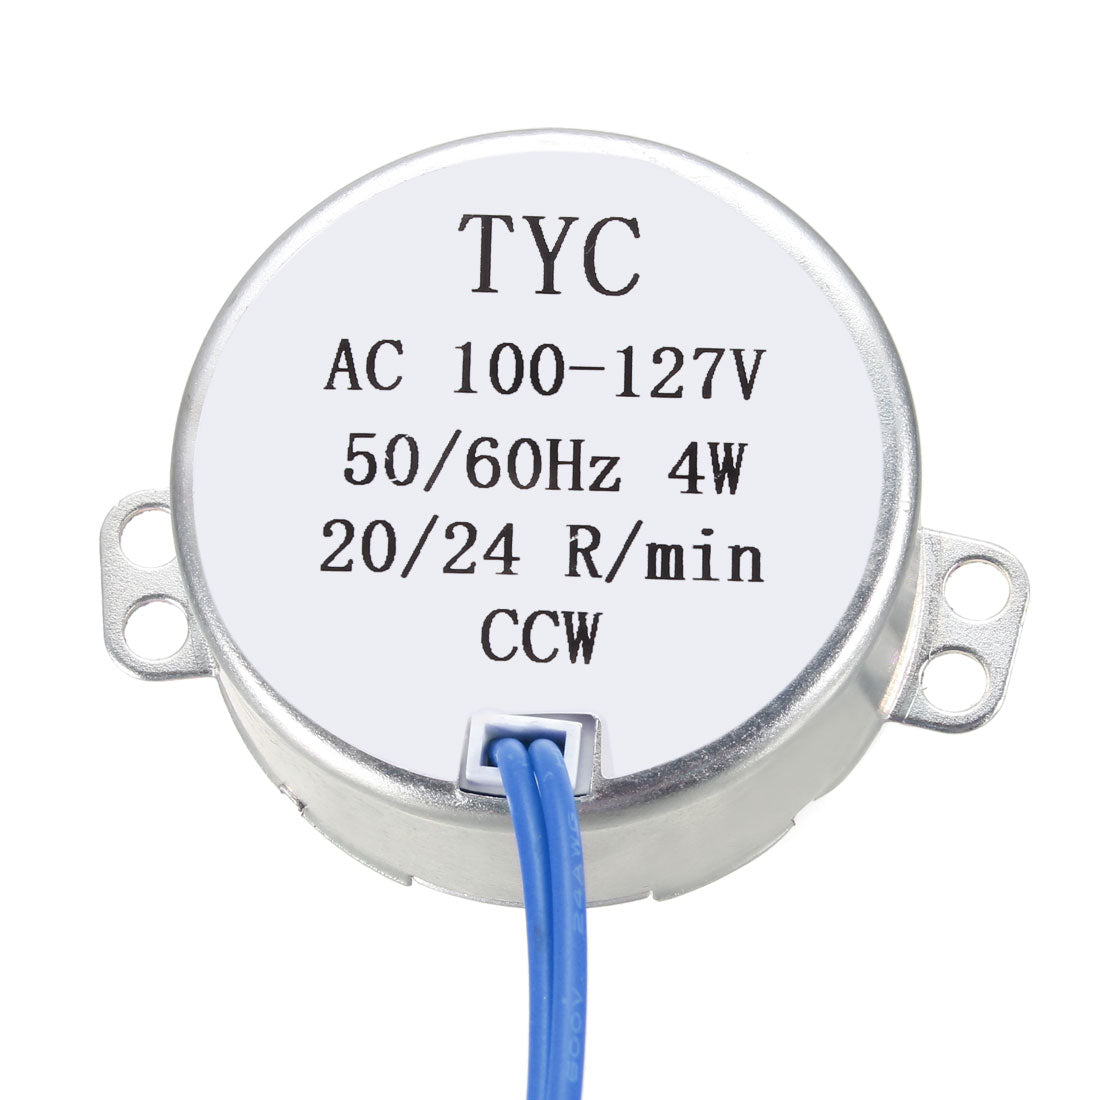 uxcell Uxcell Synchronous Synchron Motor AC 100-127V 4W 20-24PM/MIN 50-60Hz CCW for Hand-Made, Model or Guide Motor